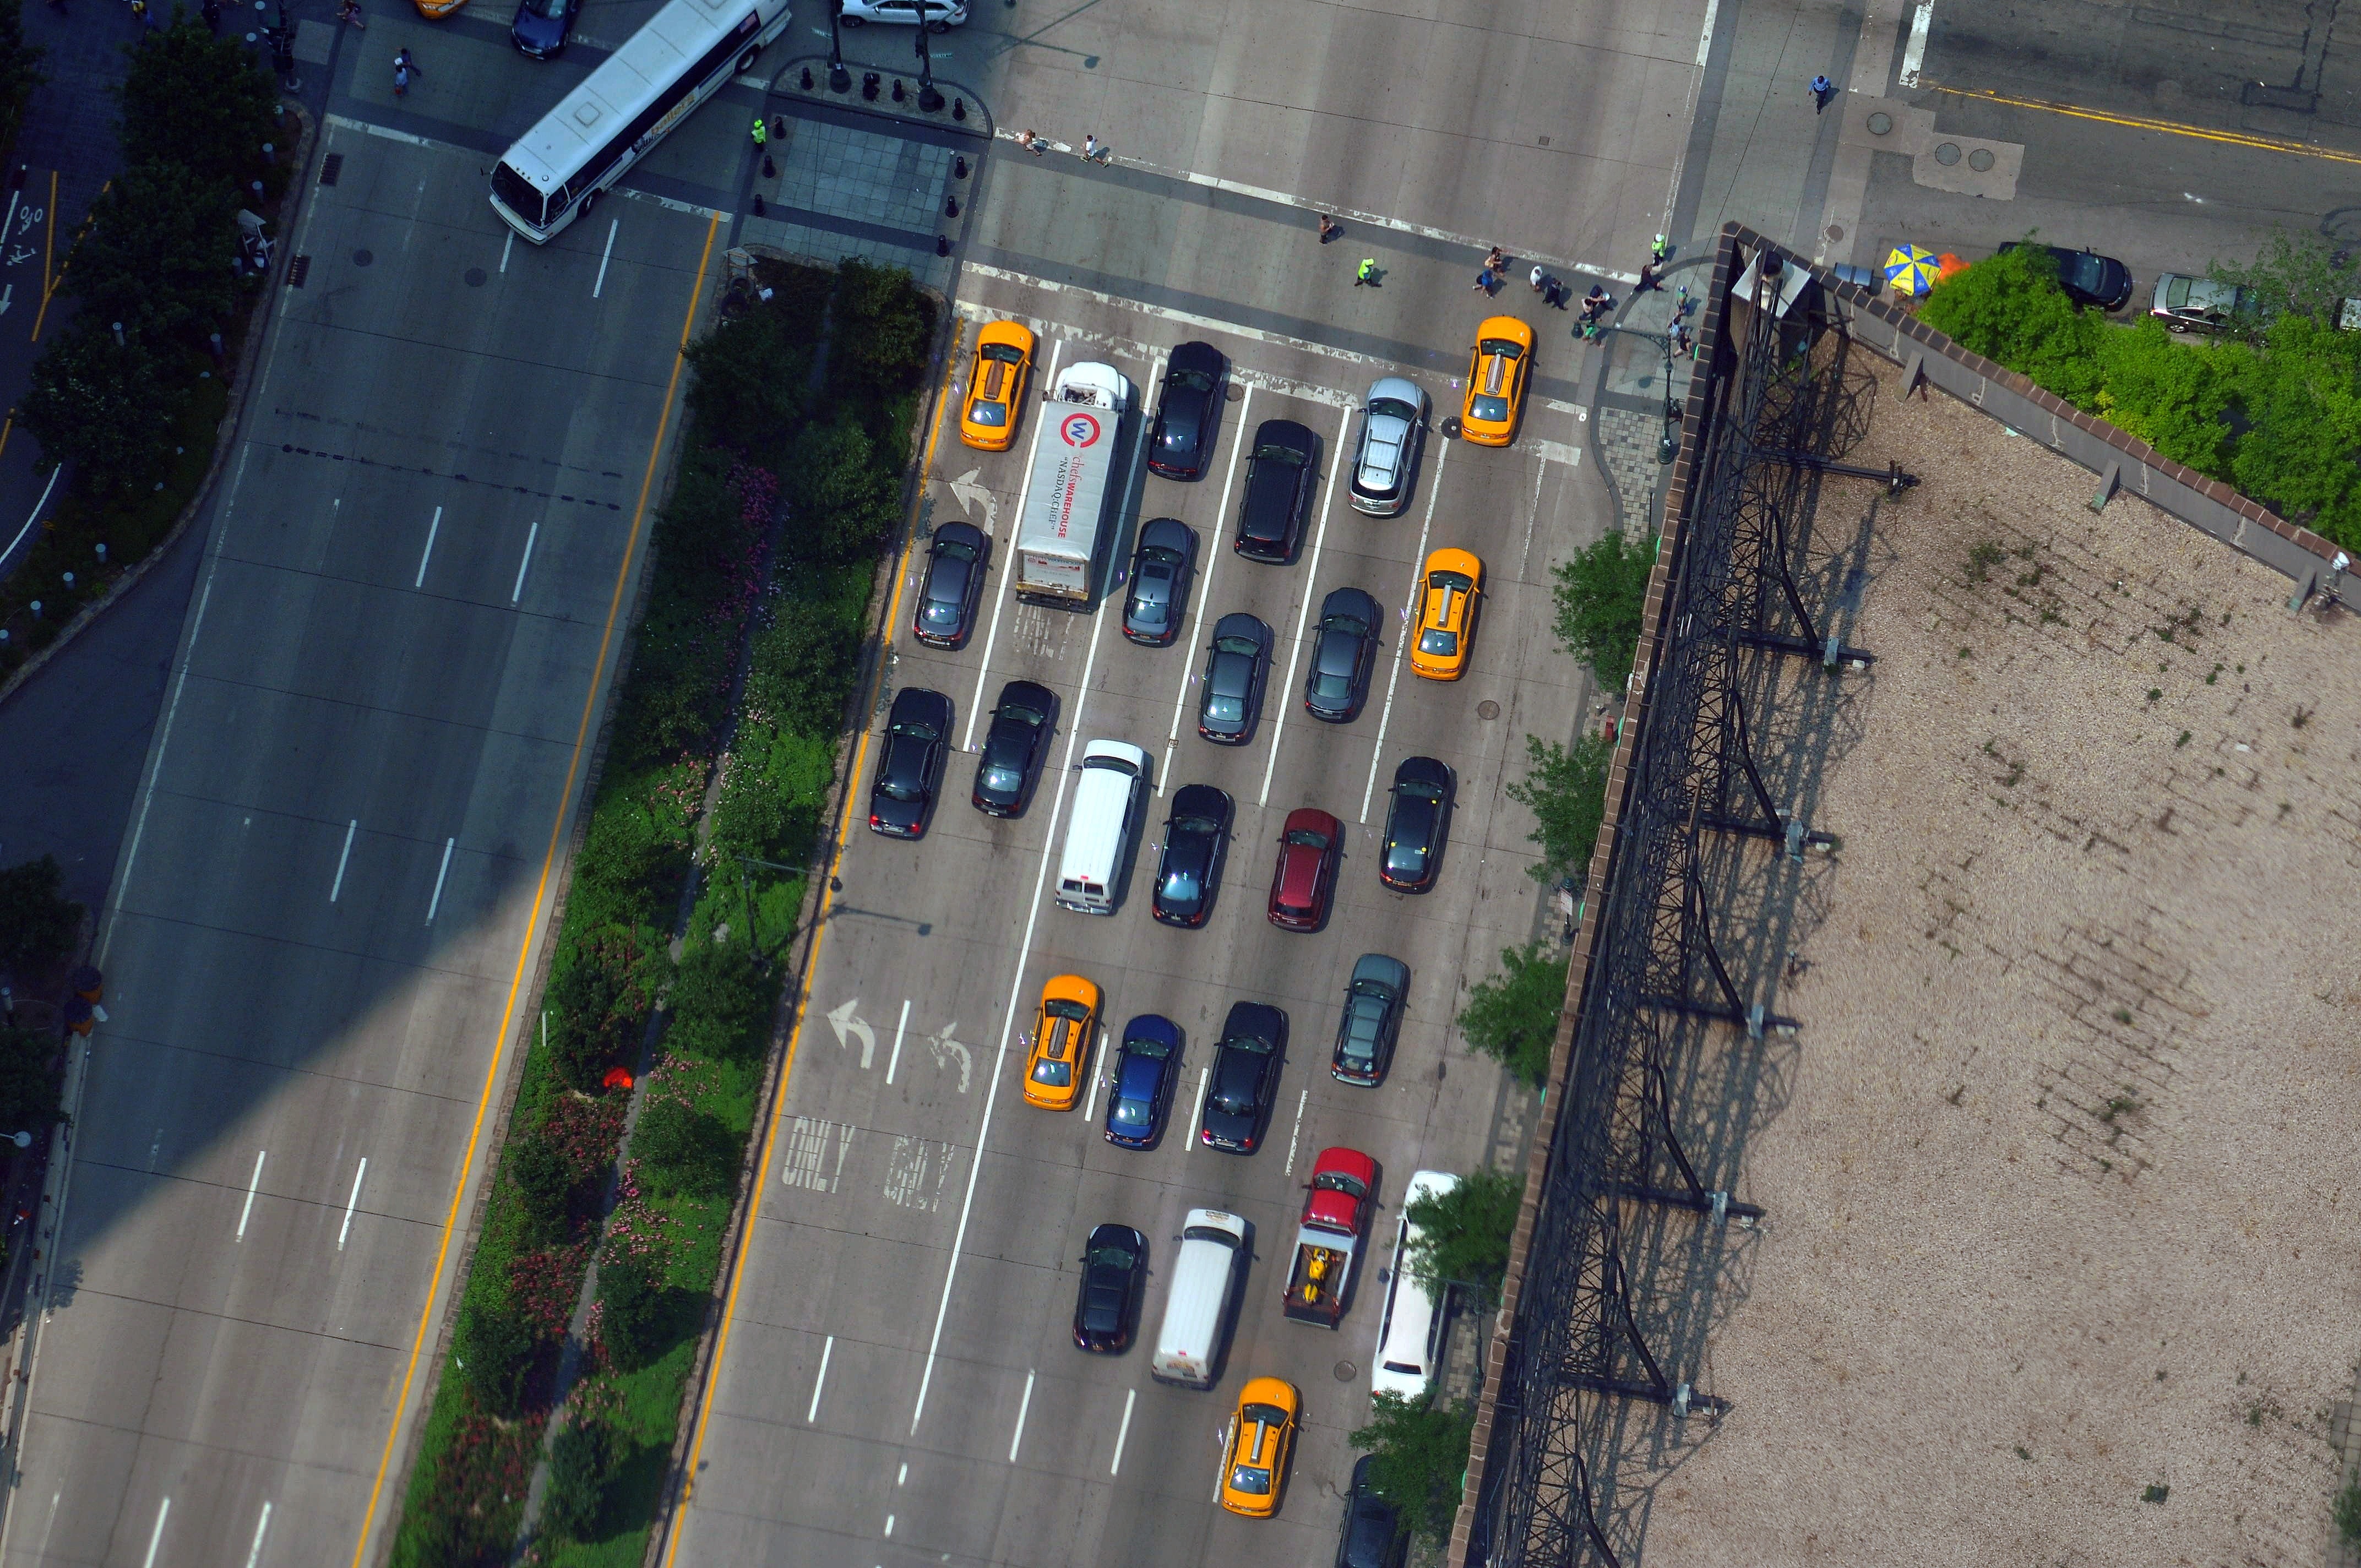 Taxi, Highway, Road, Traffic, city, aerial view